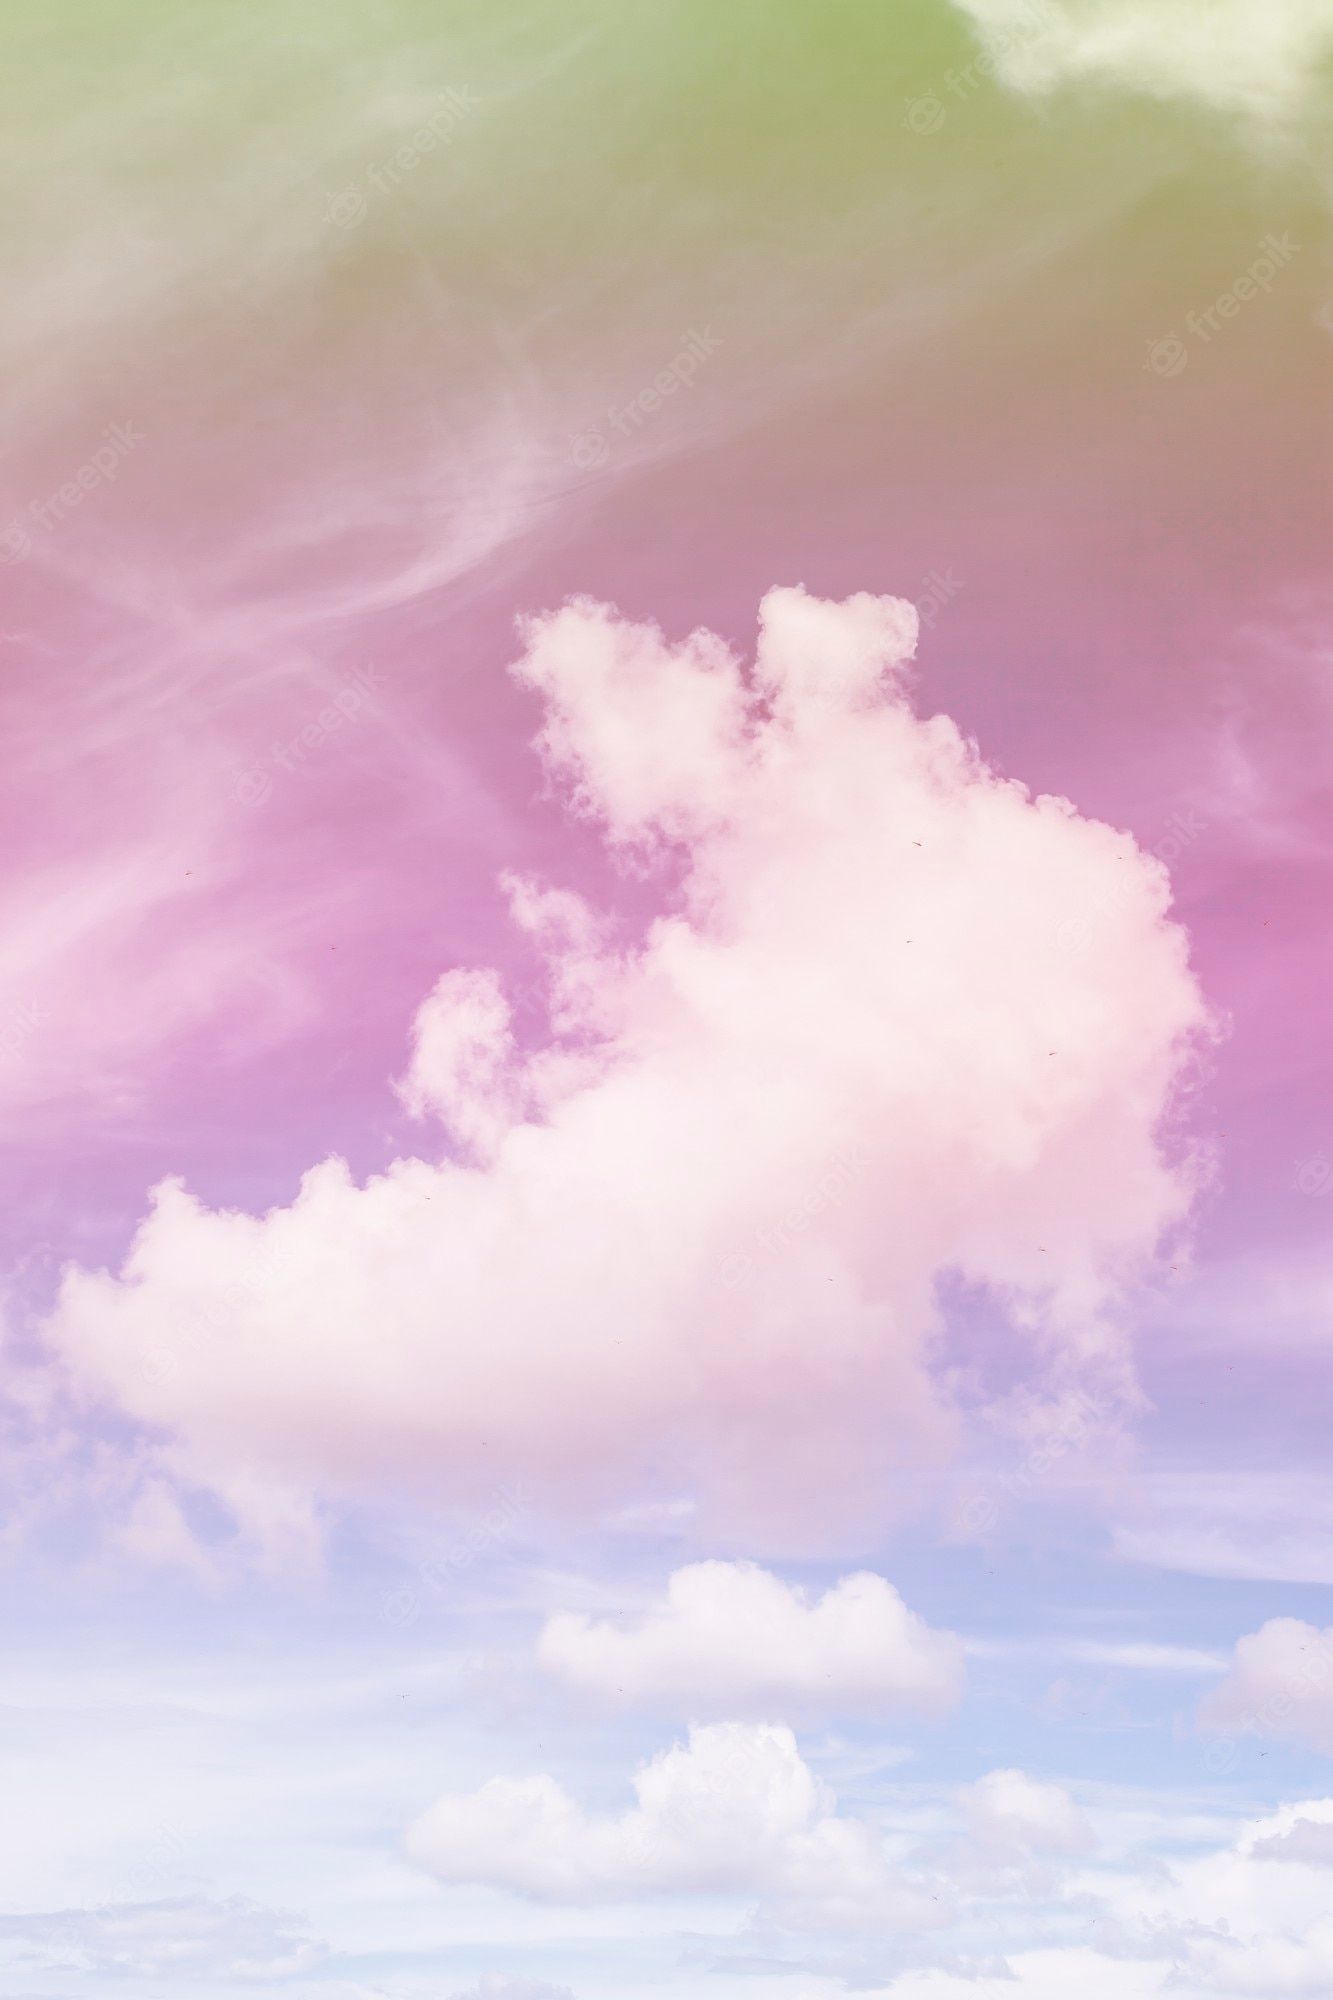 Aesthetic Clouds Wallpaper Image